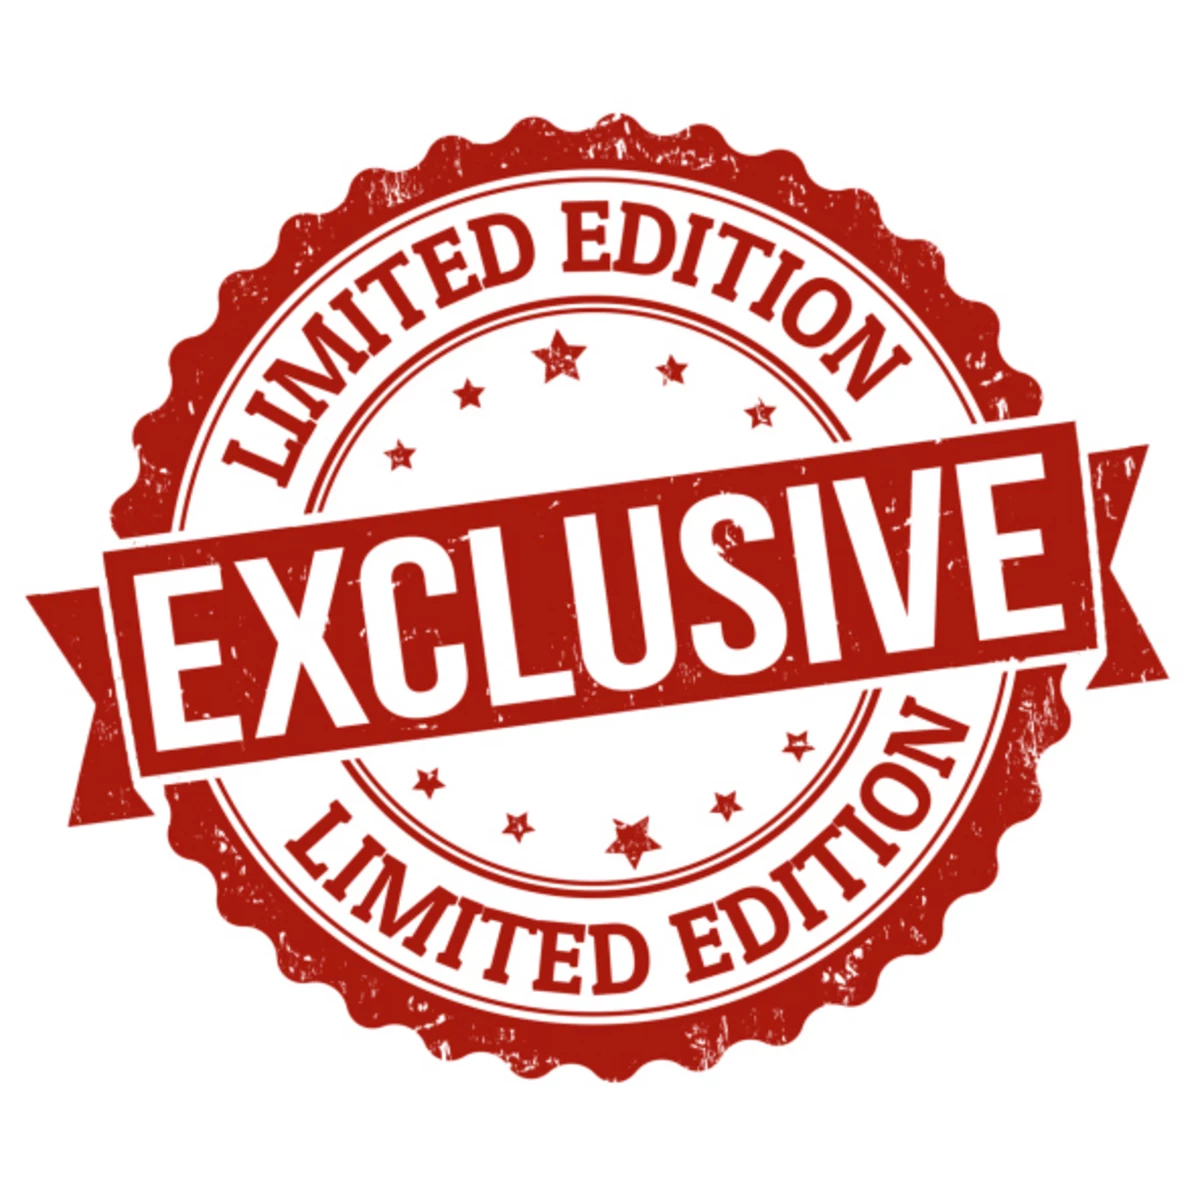 Only exclusive